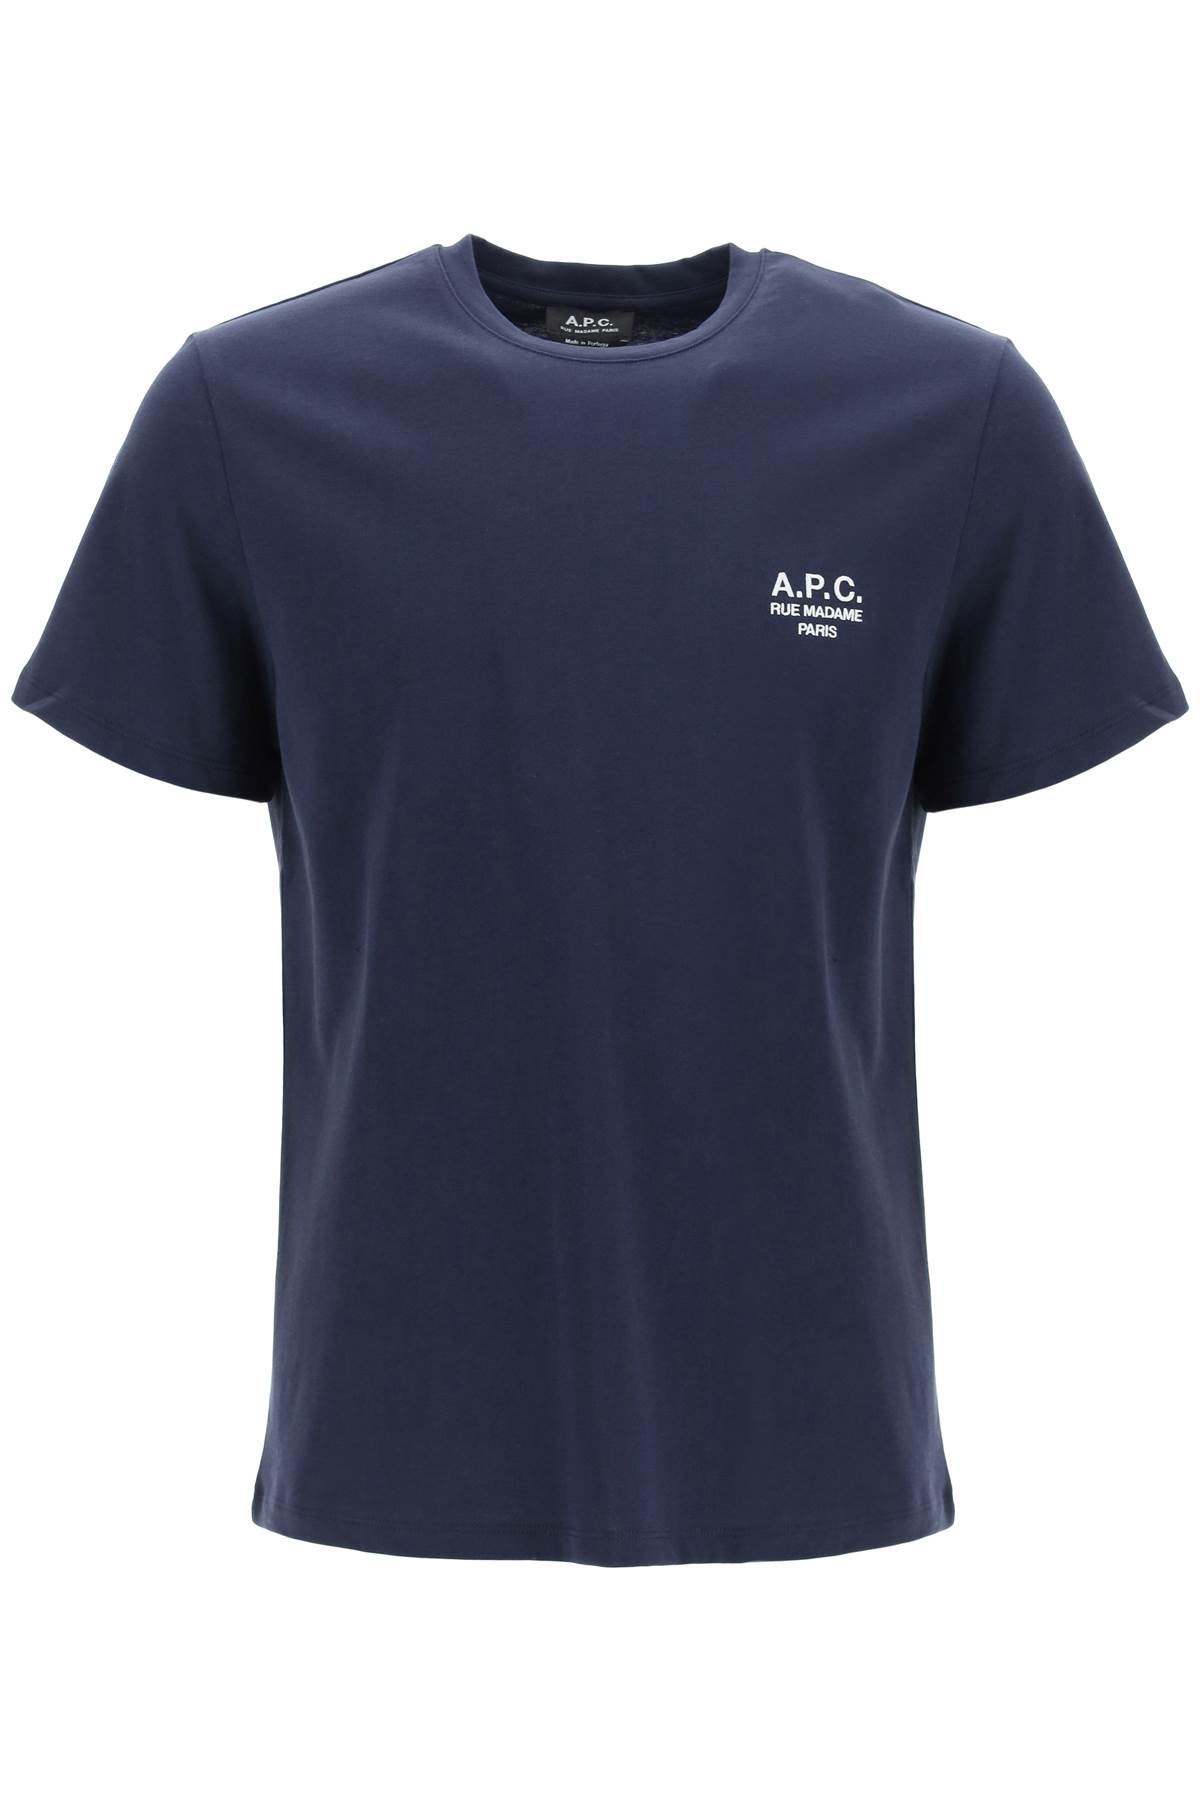 A.P.C. Logo Embroidery T-shirt